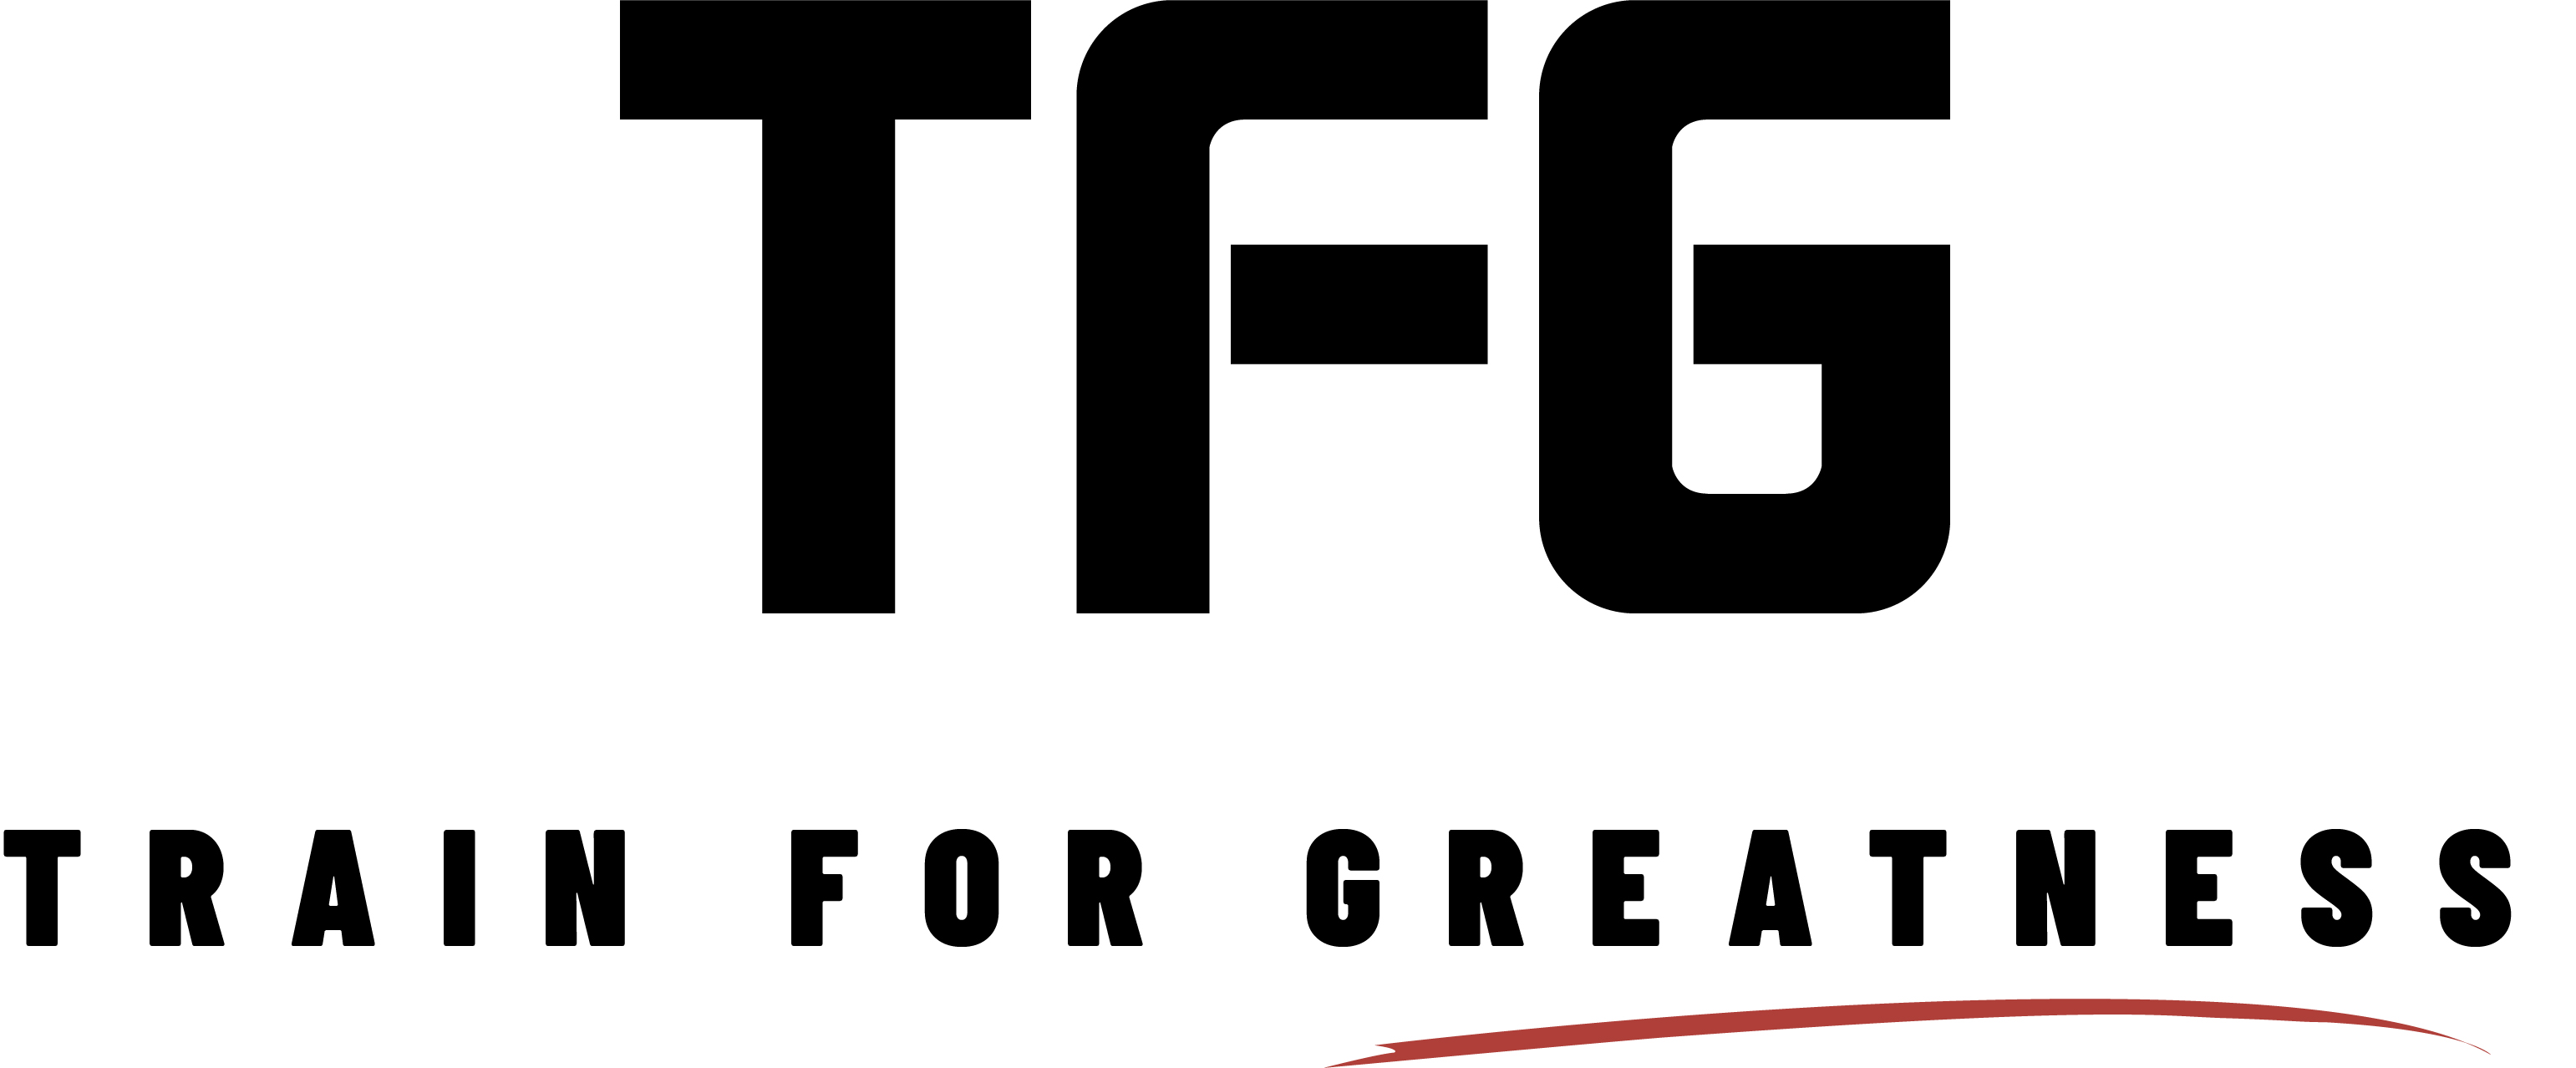 TFG: Train For Greatness logo